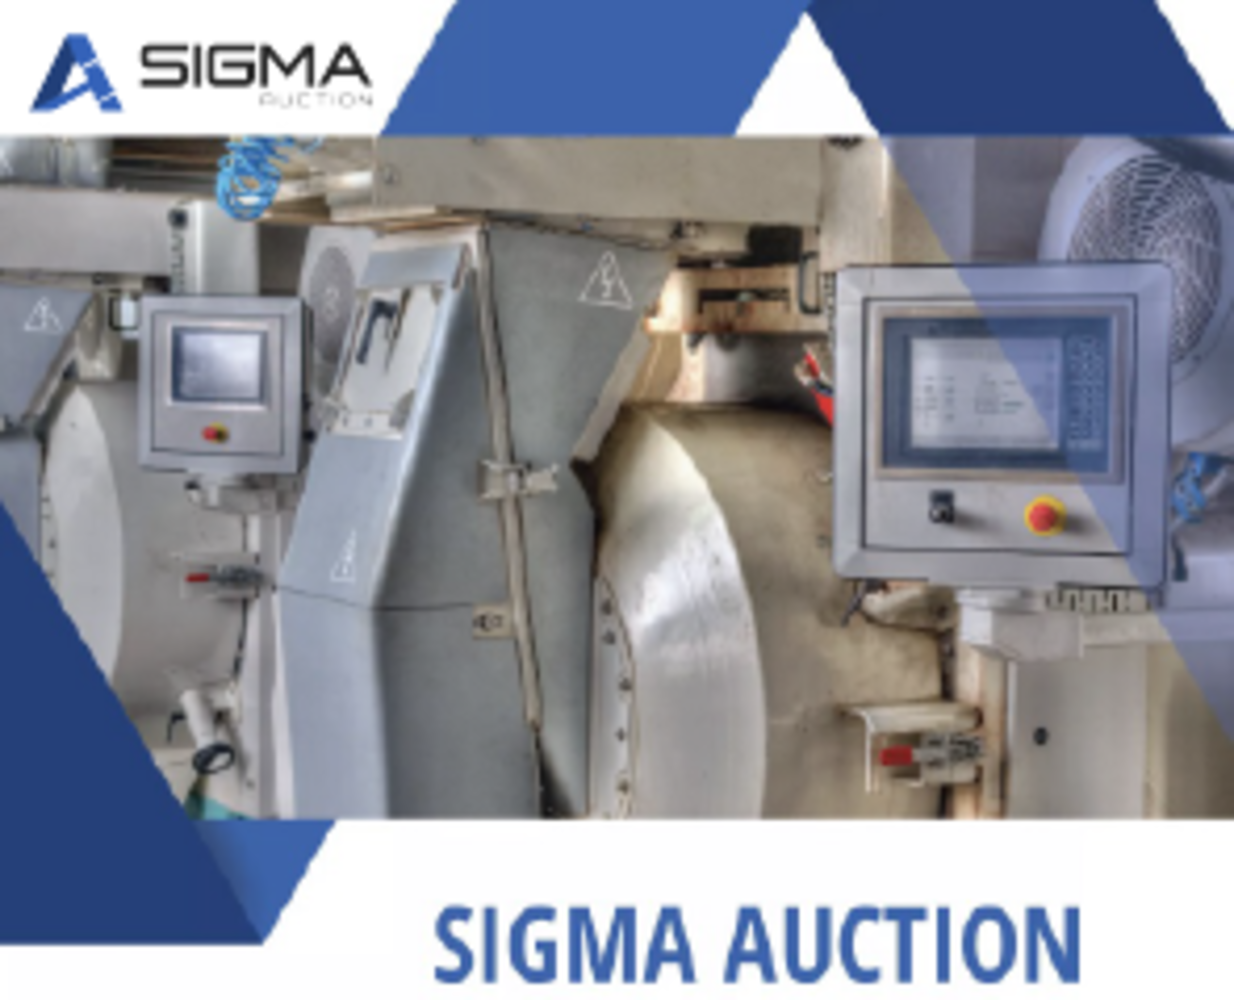 Support Equipment for a Manufacturing Plant Consignment Auction